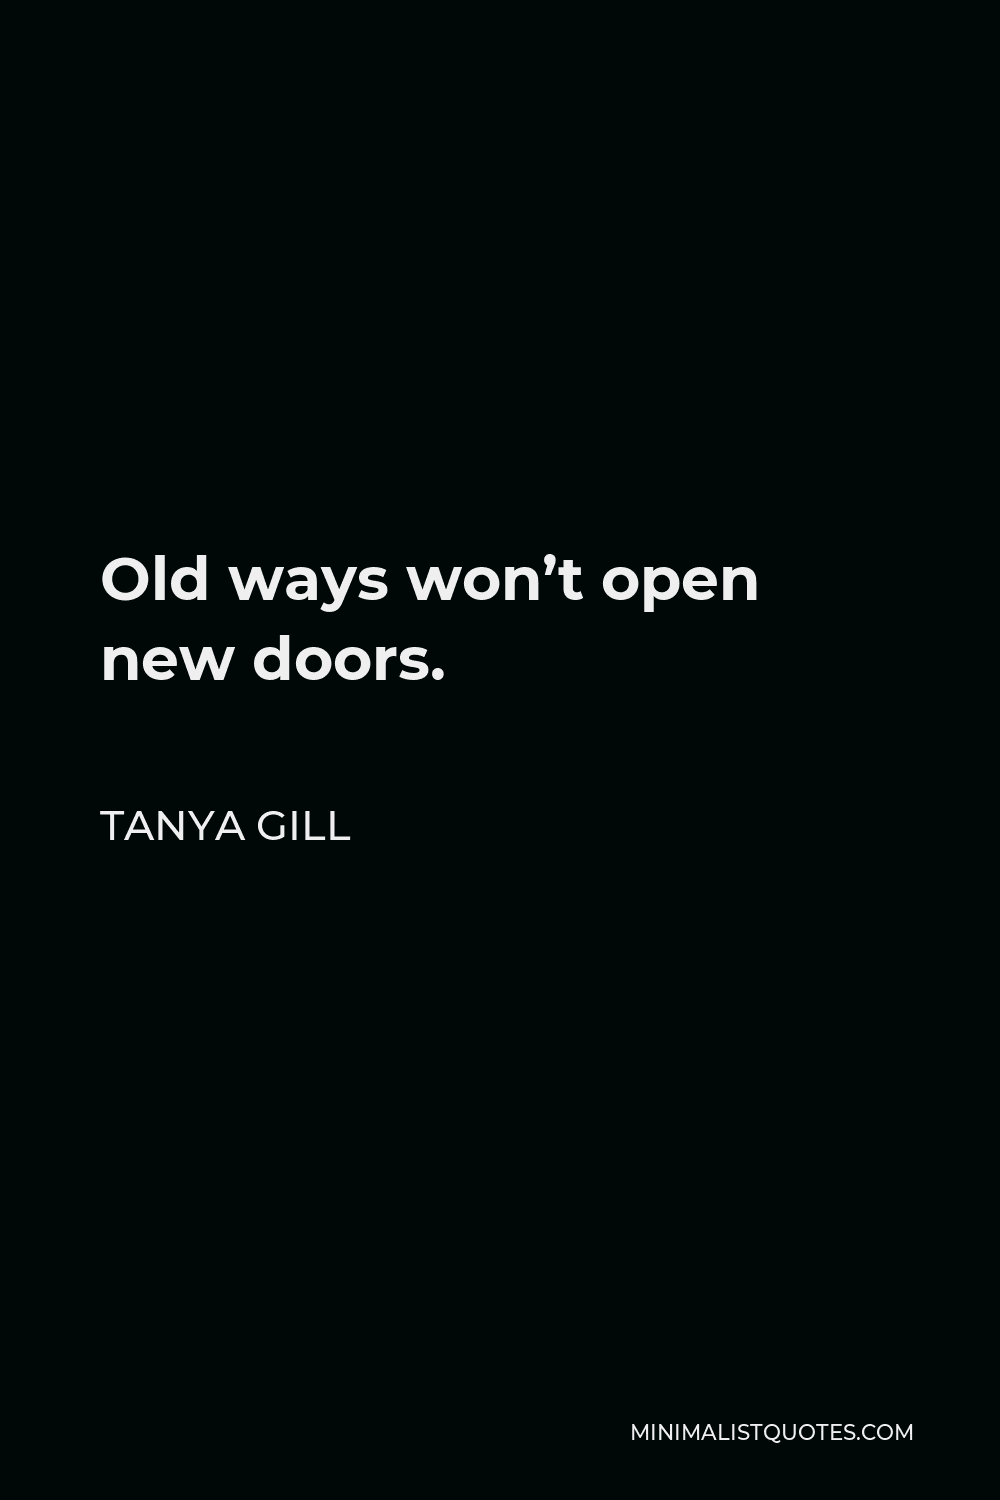 Tanya Gill Quote - Old ways won’t open new doors.